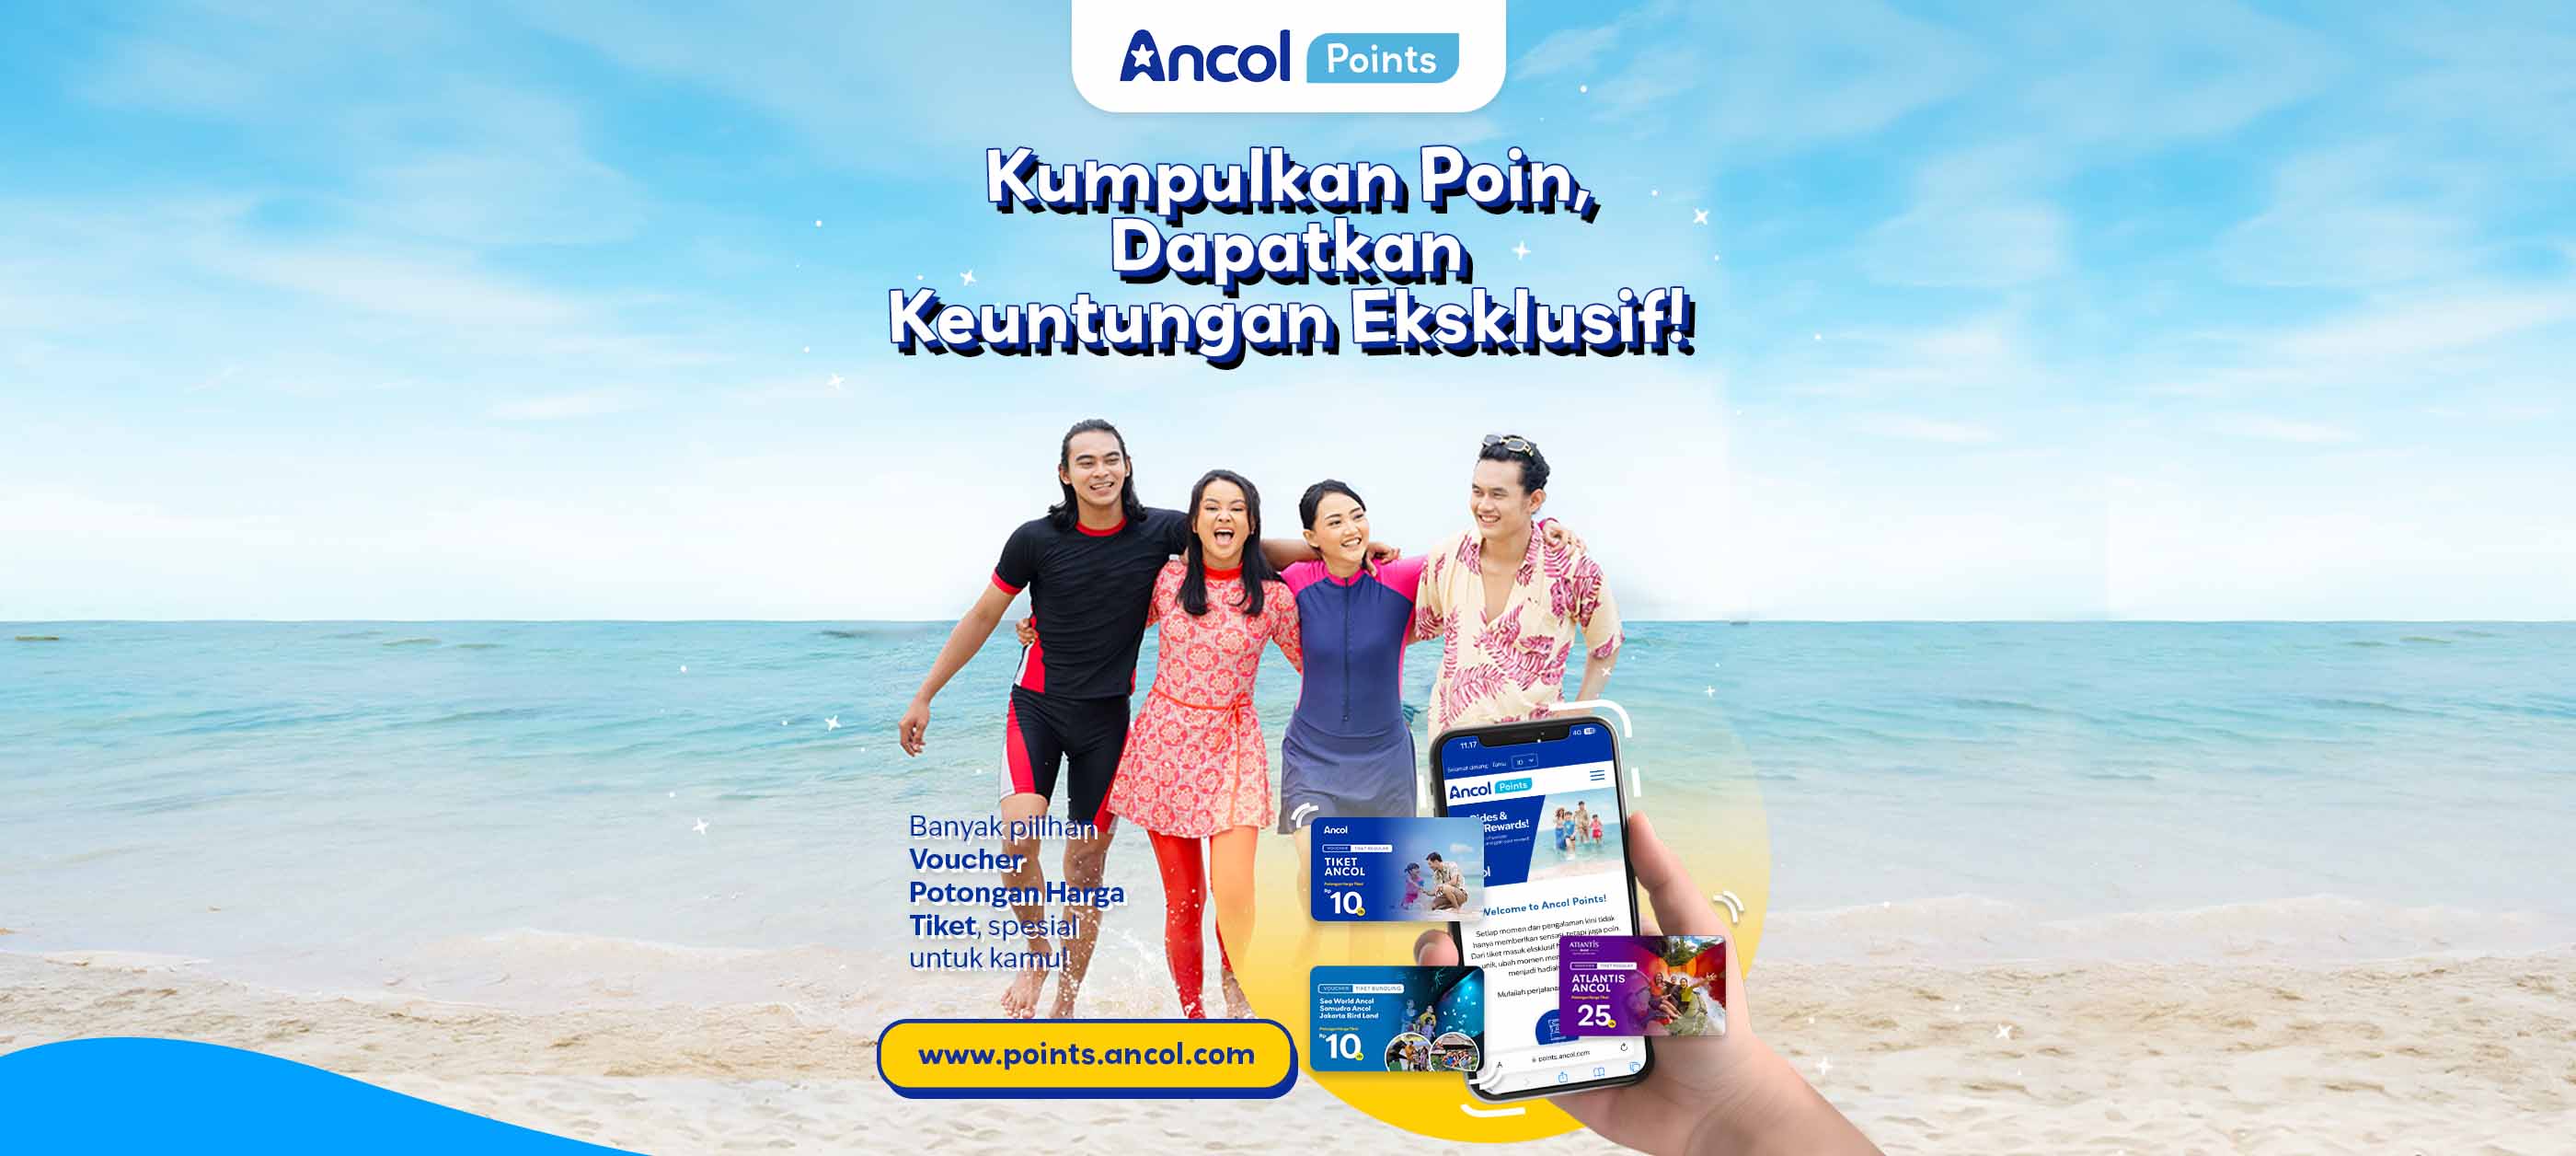 Ancol Points